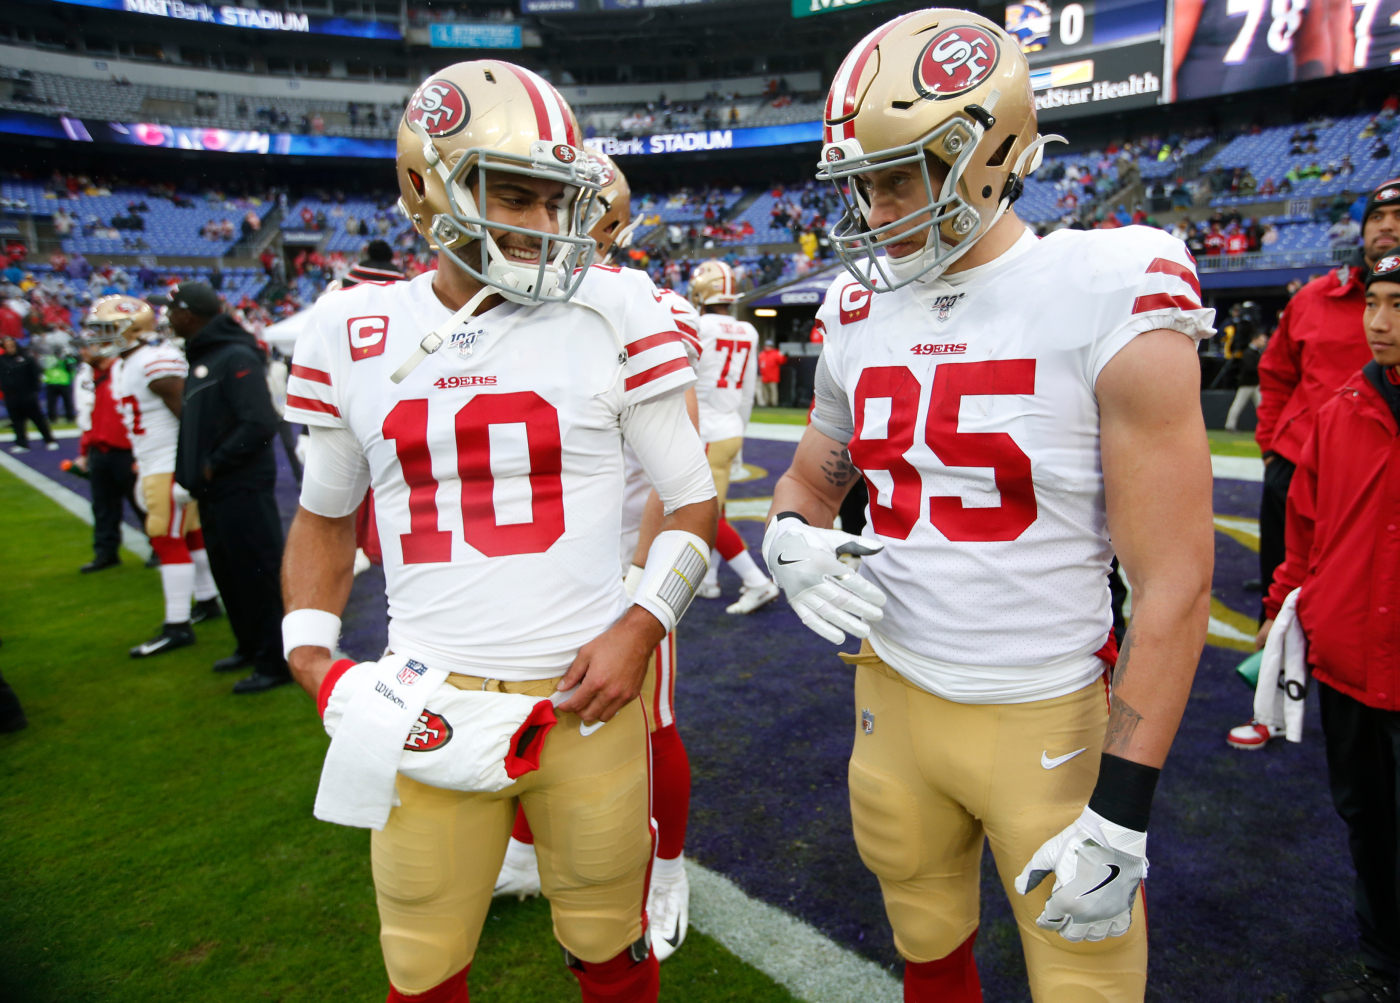 Jimmy Garoppolo has had a roller-coaster career with the San Francisco 49ers. George Kittle now has a stern message about his quarterback.